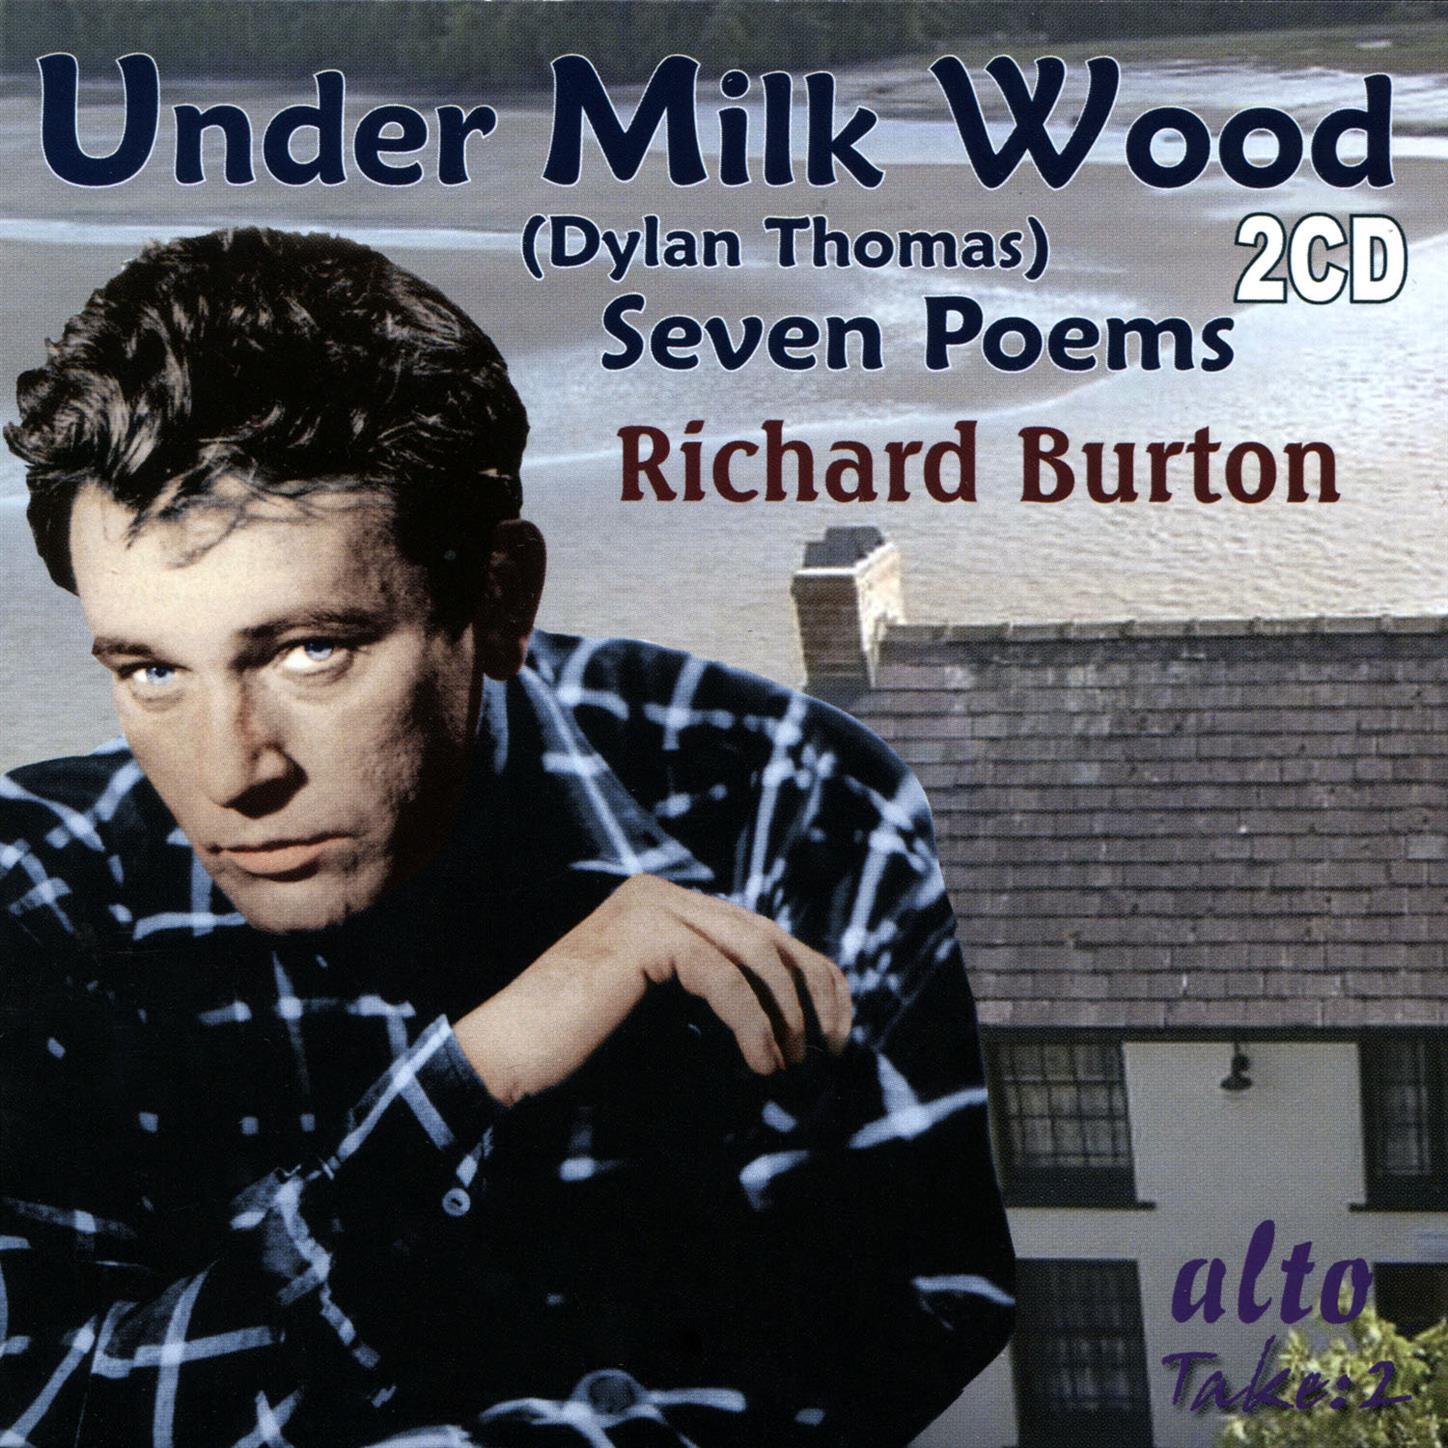 Under Milk Wood: Too late, cock